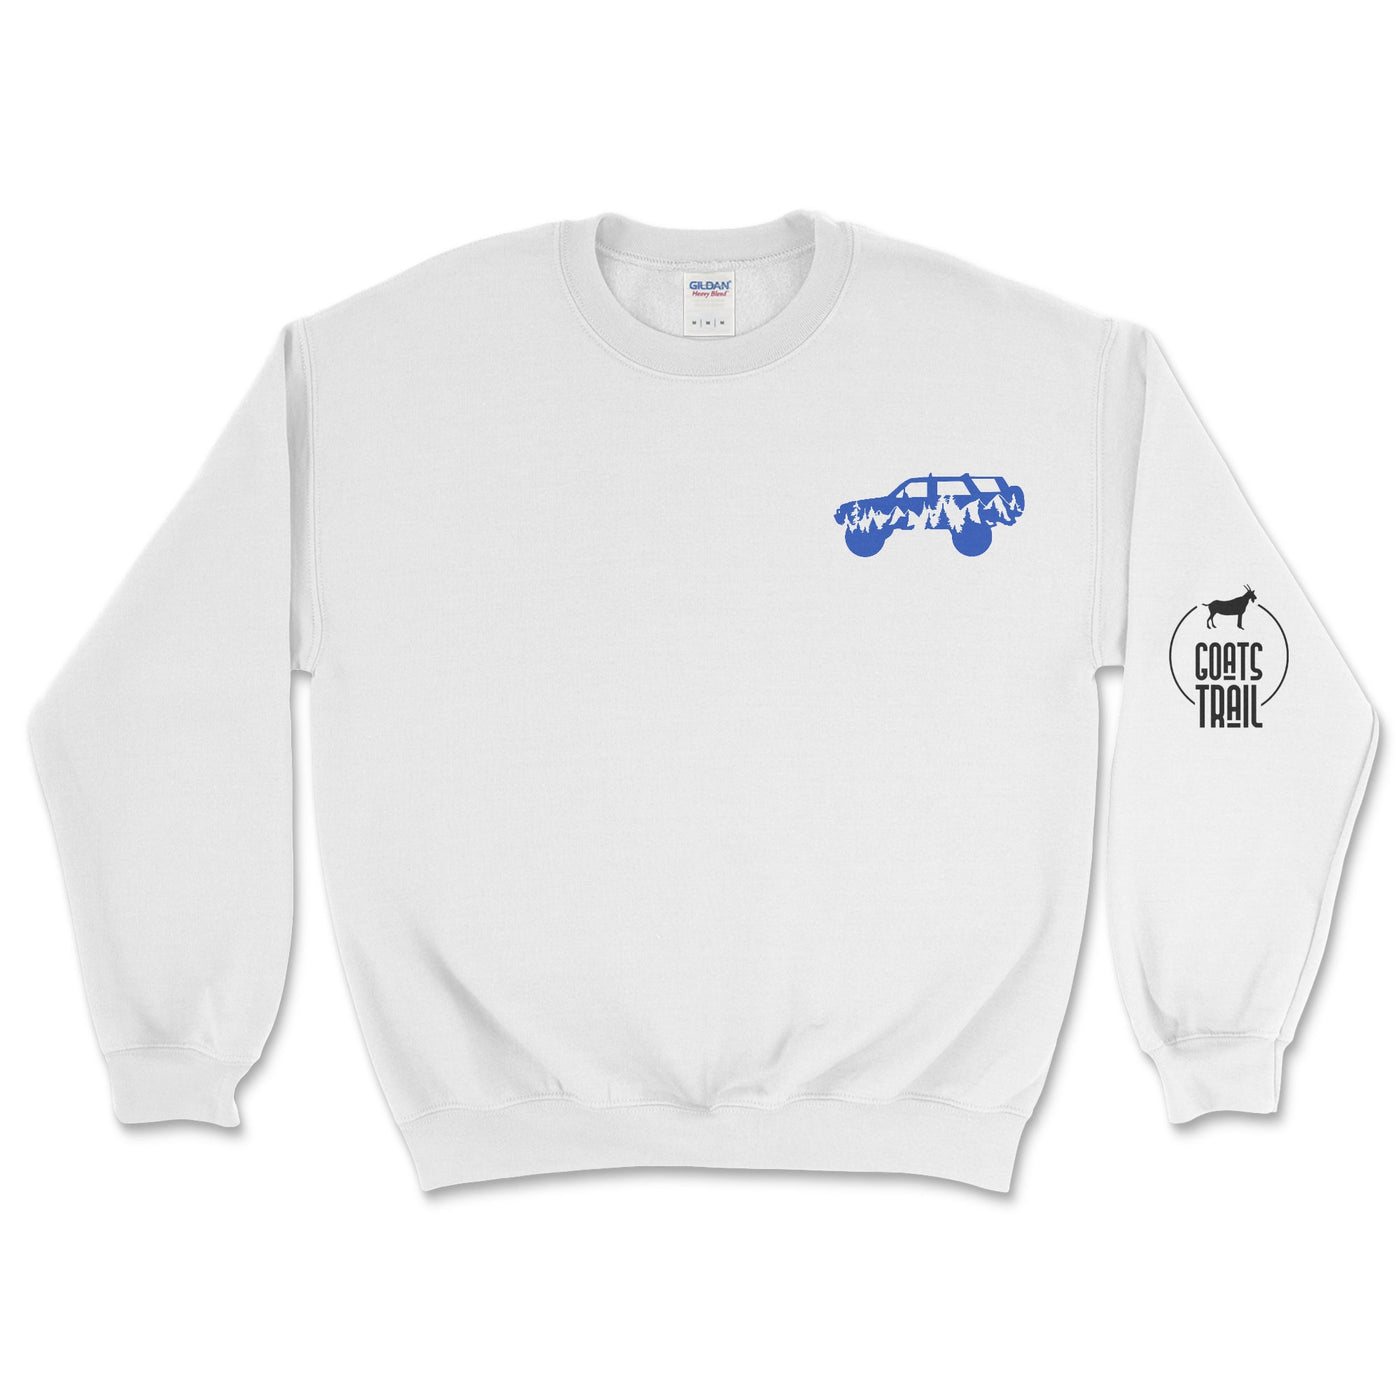 Places You Will Go 4Runner Blue Crewneck - Goats Trail Off-Road Apparel Company